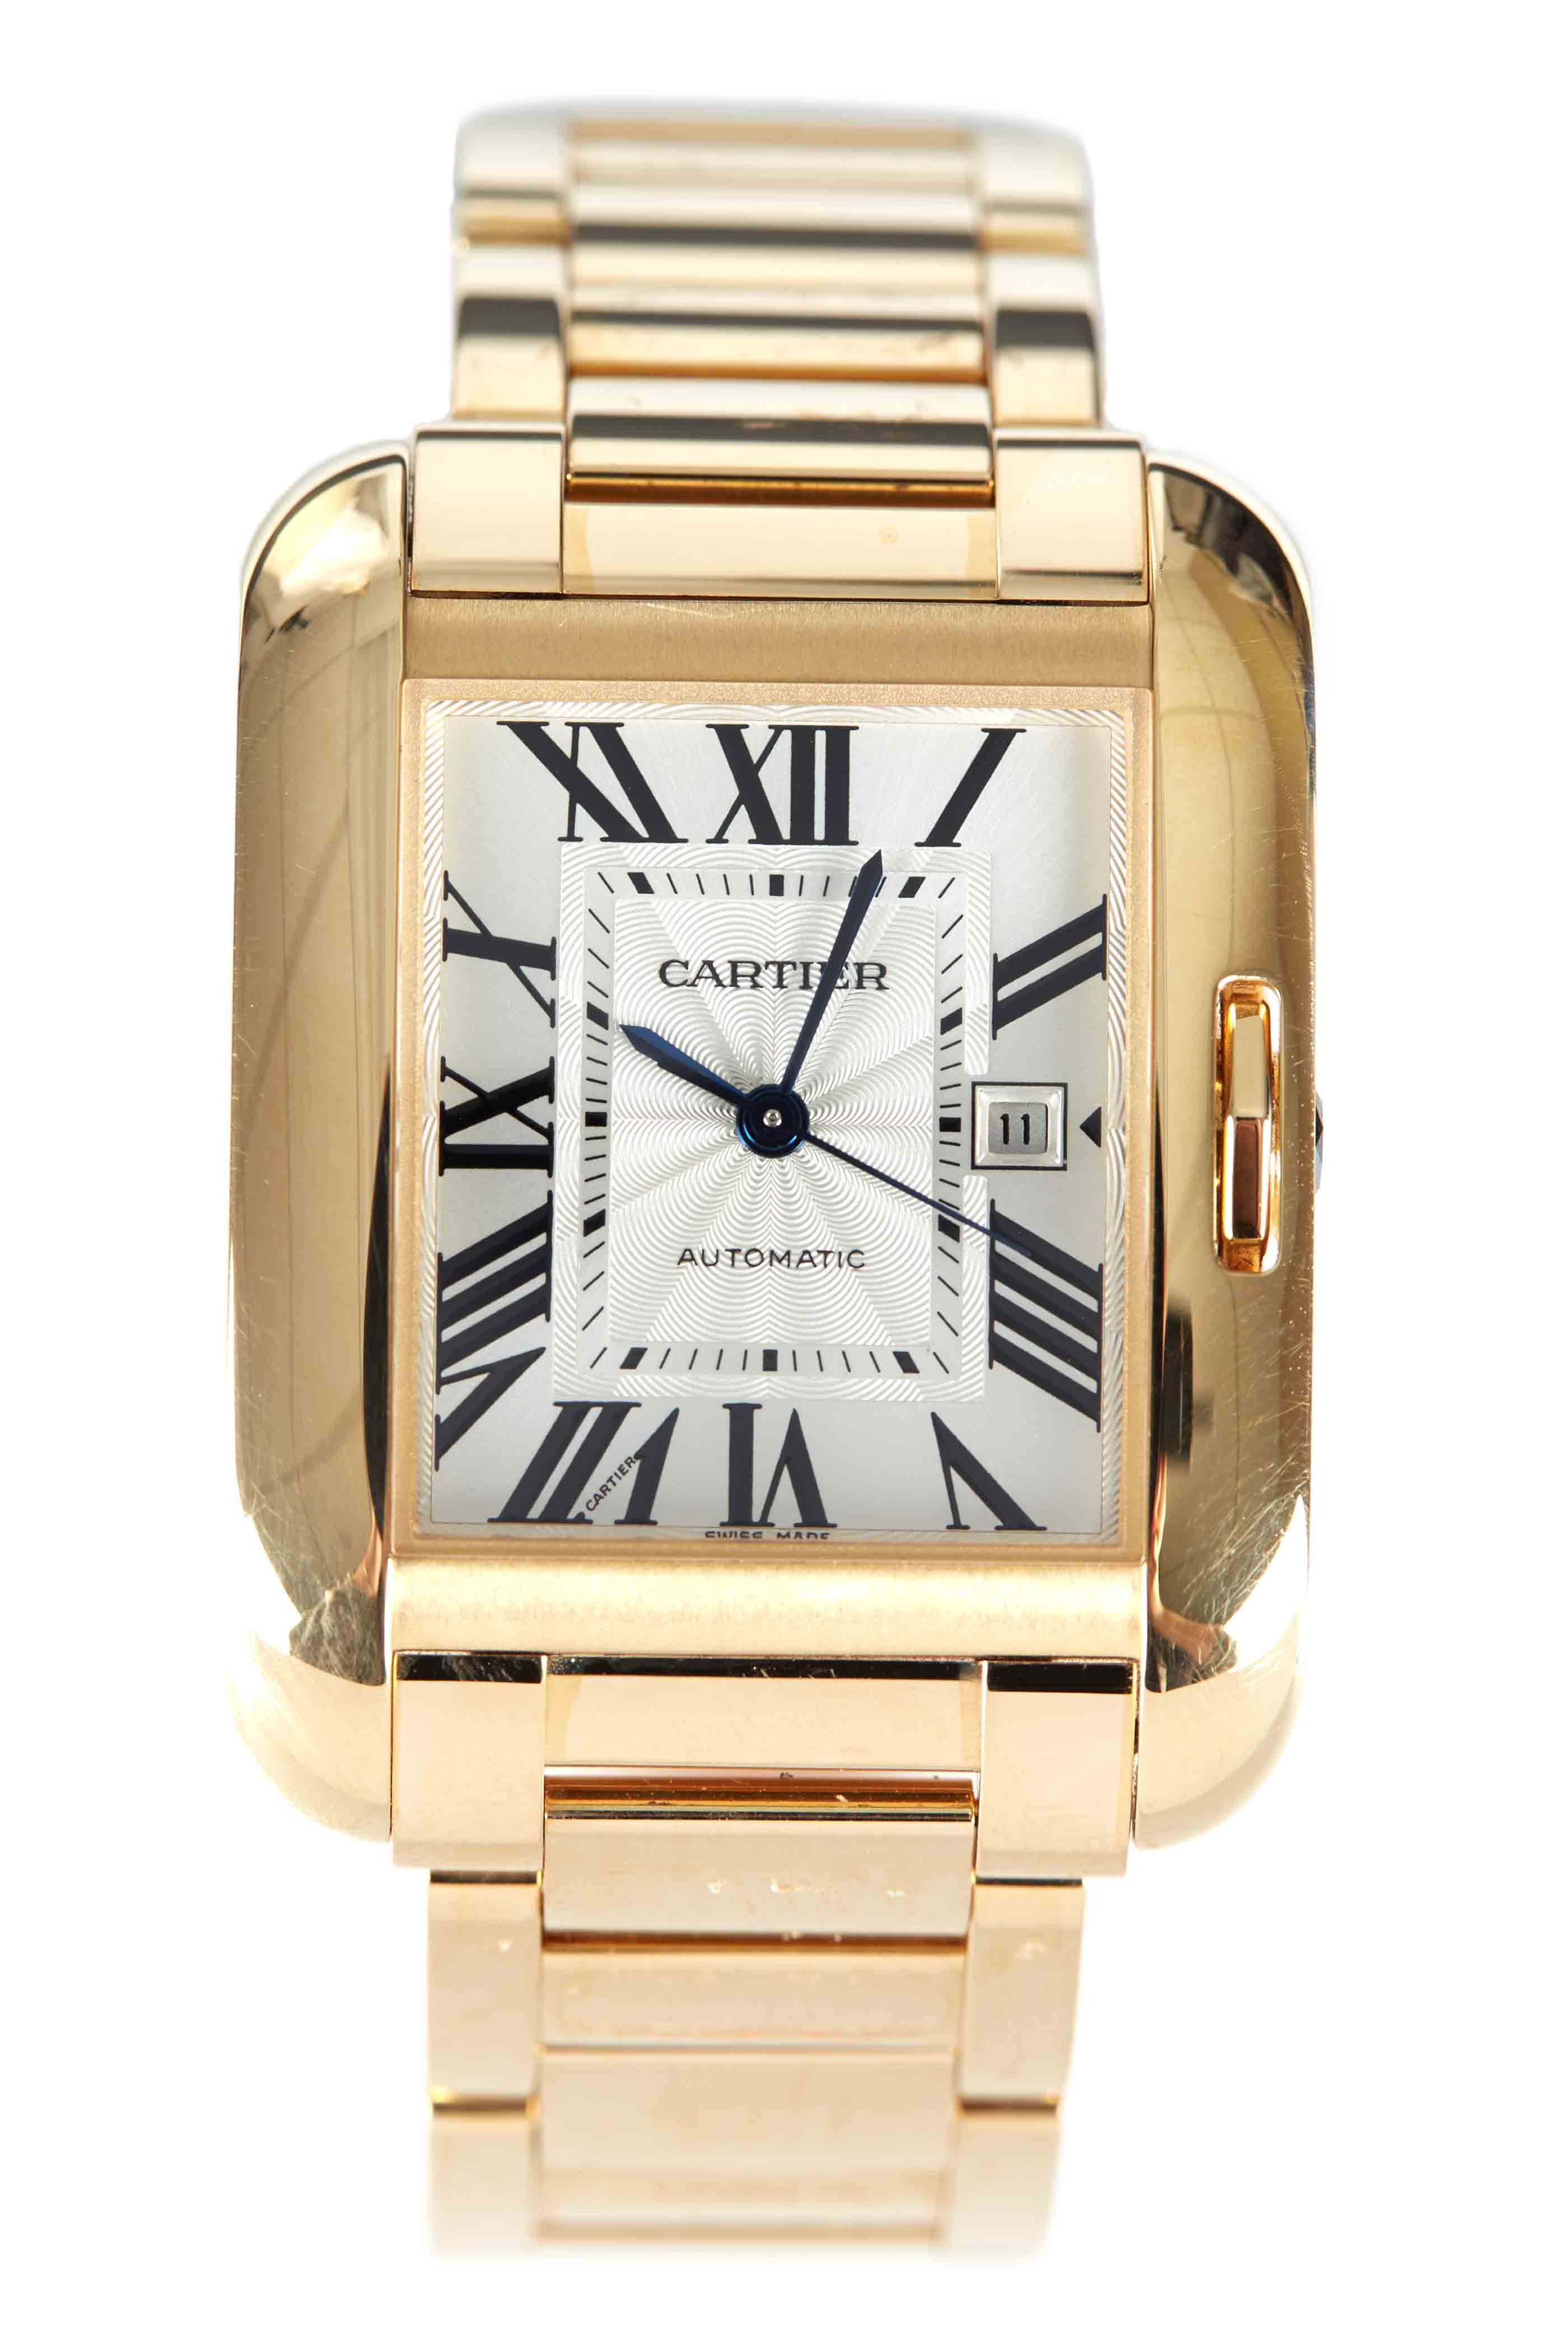 cartier tank anglaise yellow gold